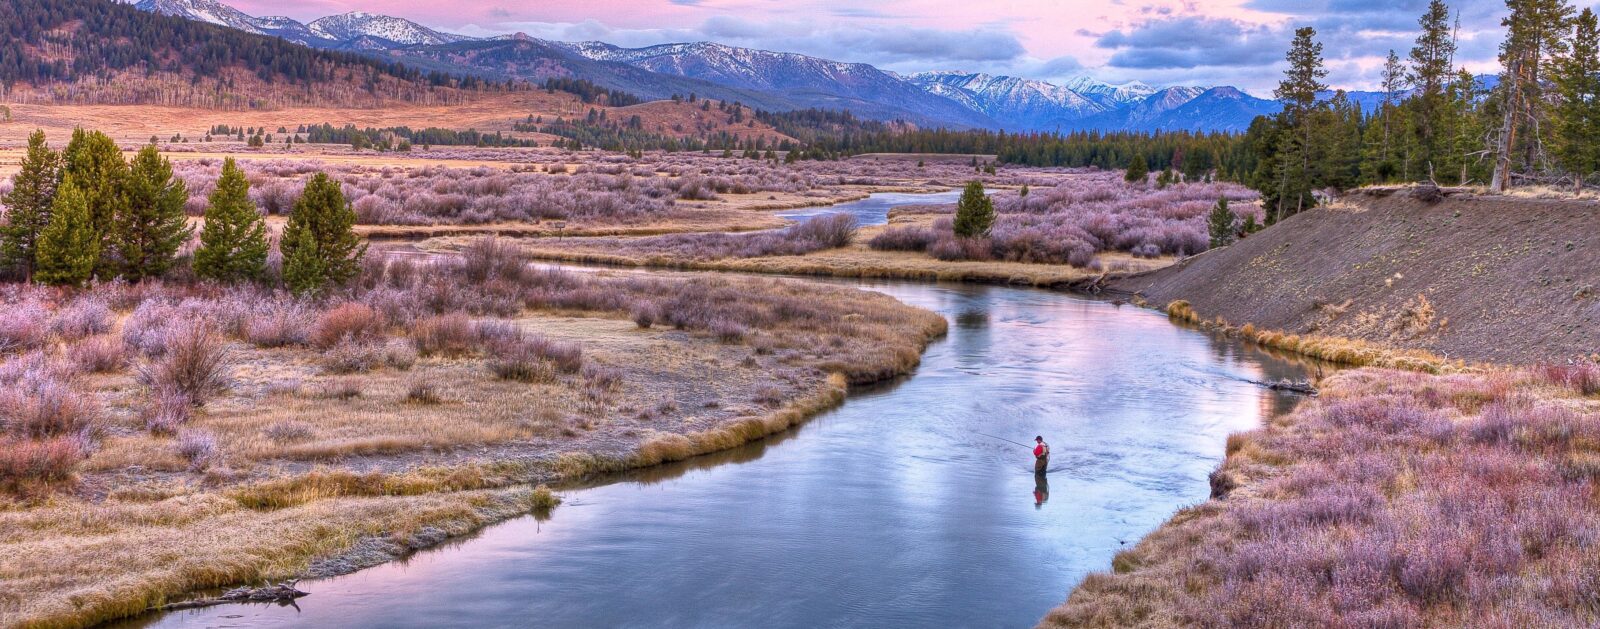 South Fork, Madison River, MT | Photo by Ken Takata